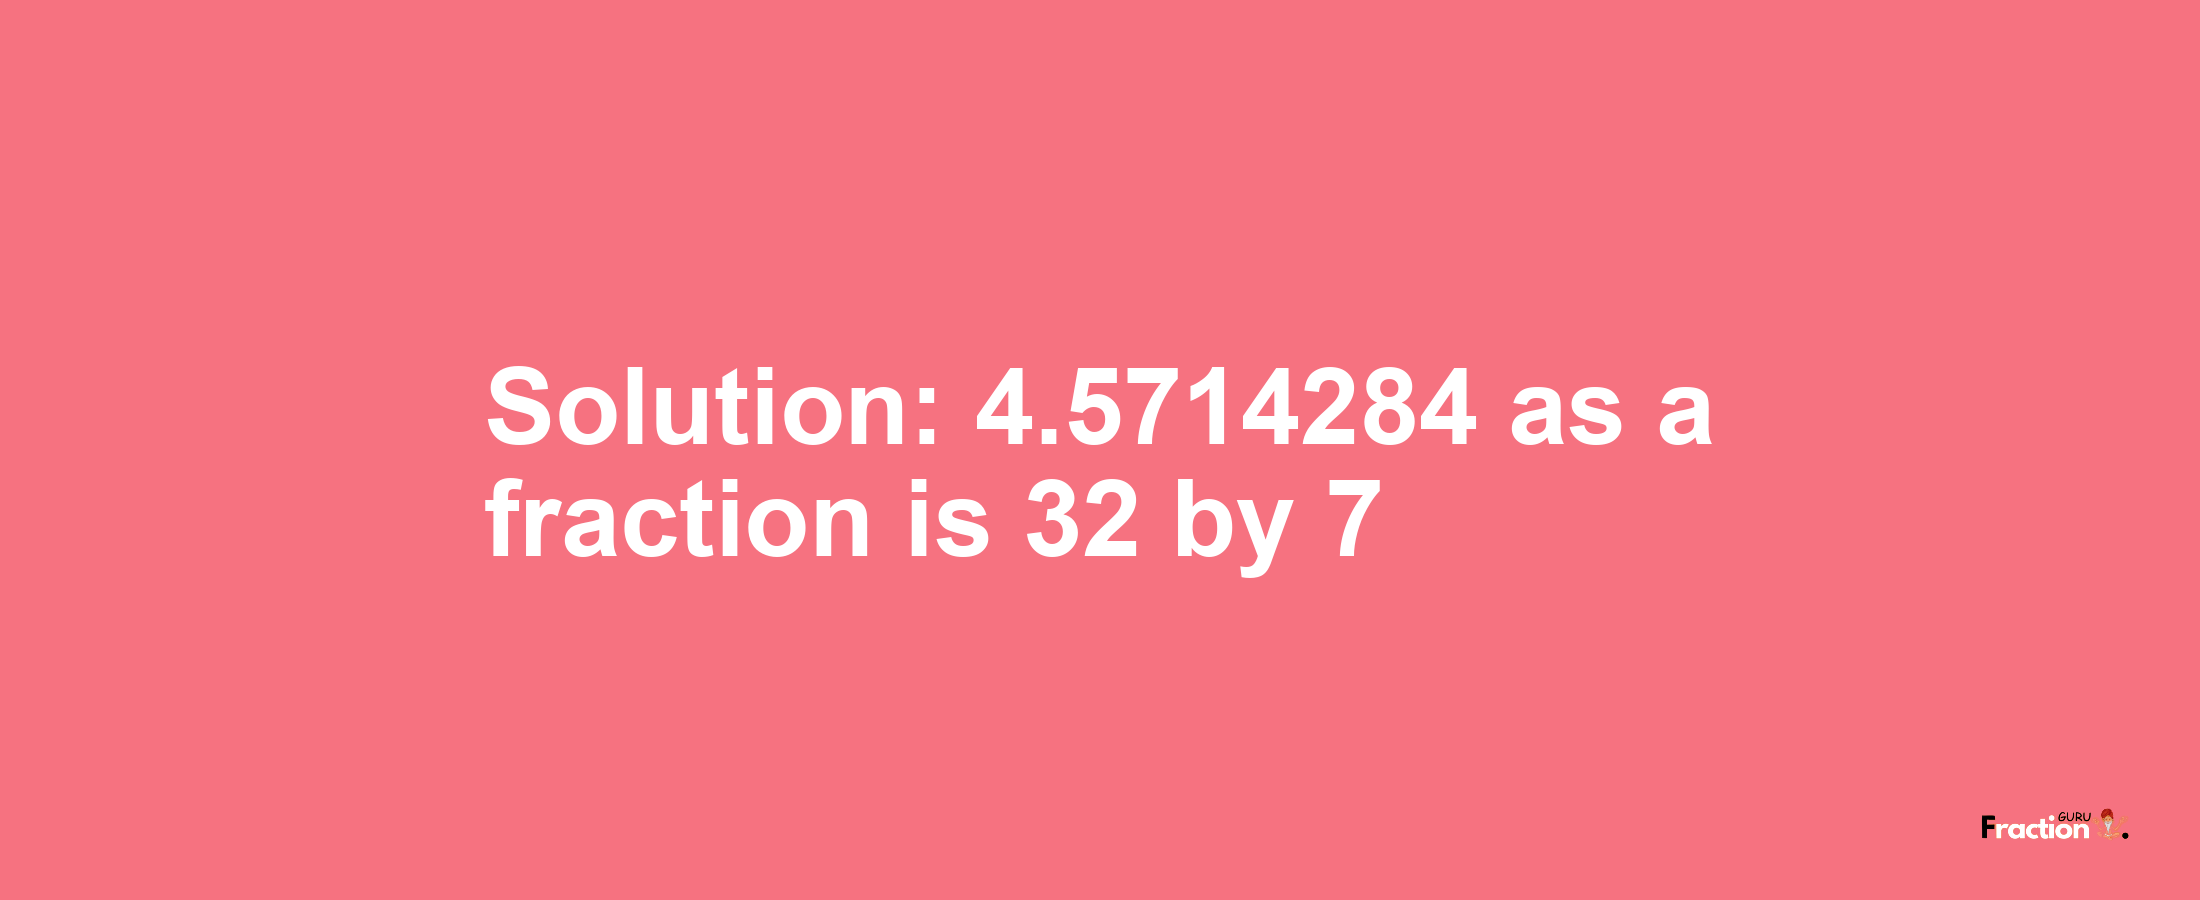 Solution:4.5714284 as a fraction is 32/7